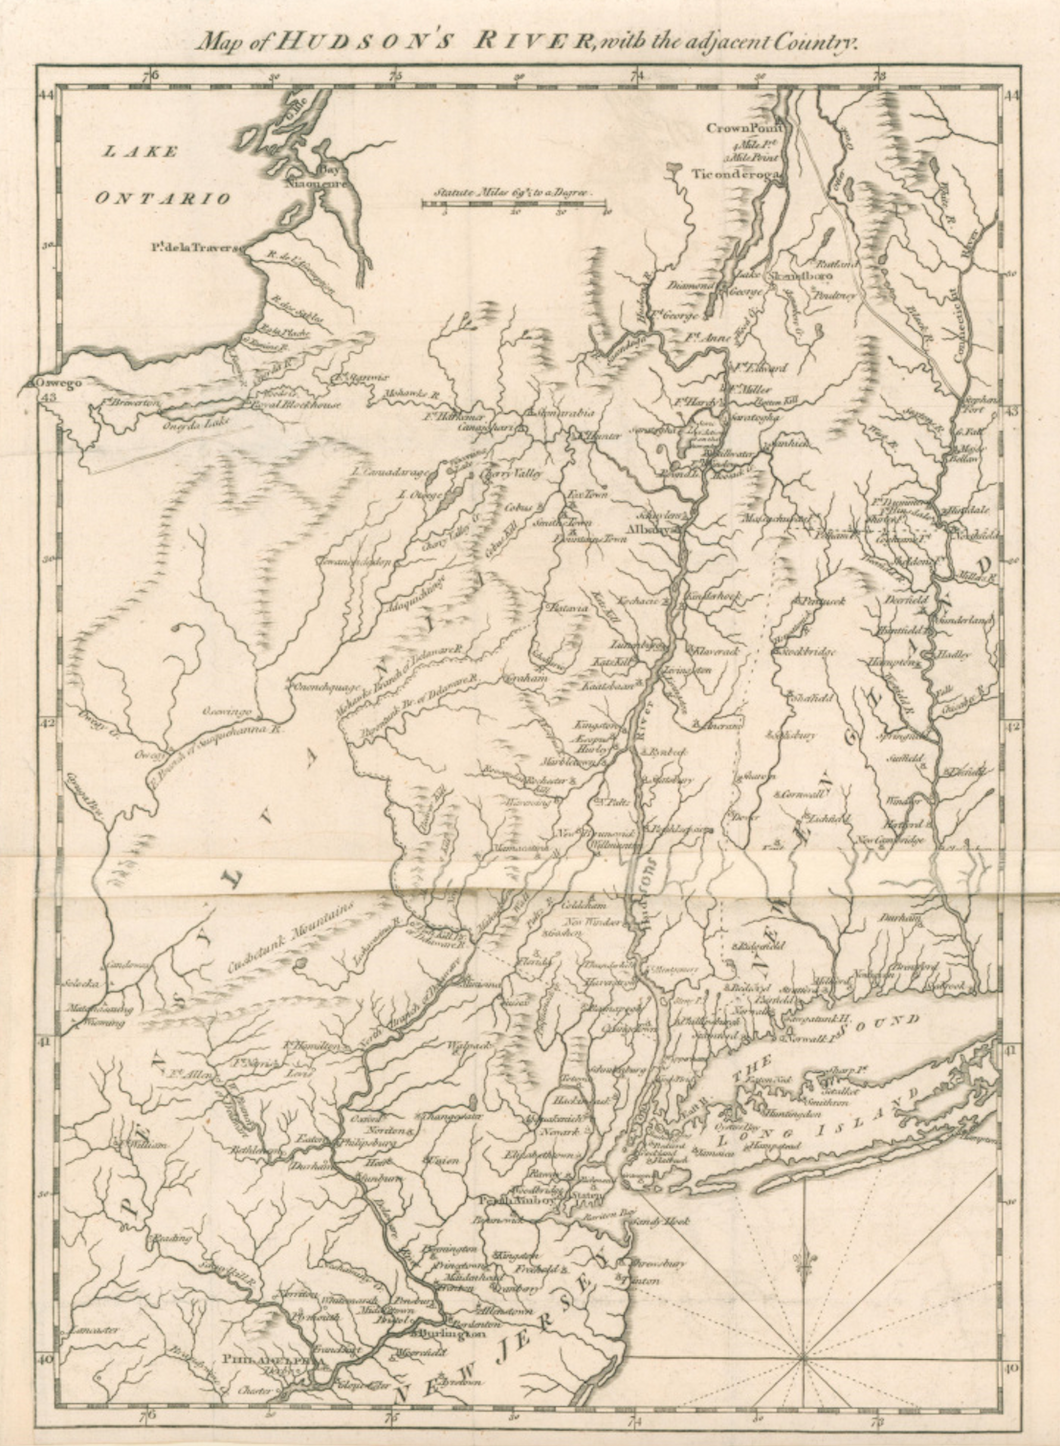 Unattributed.  “Map of Hudson’s River, with the adjacent Country”